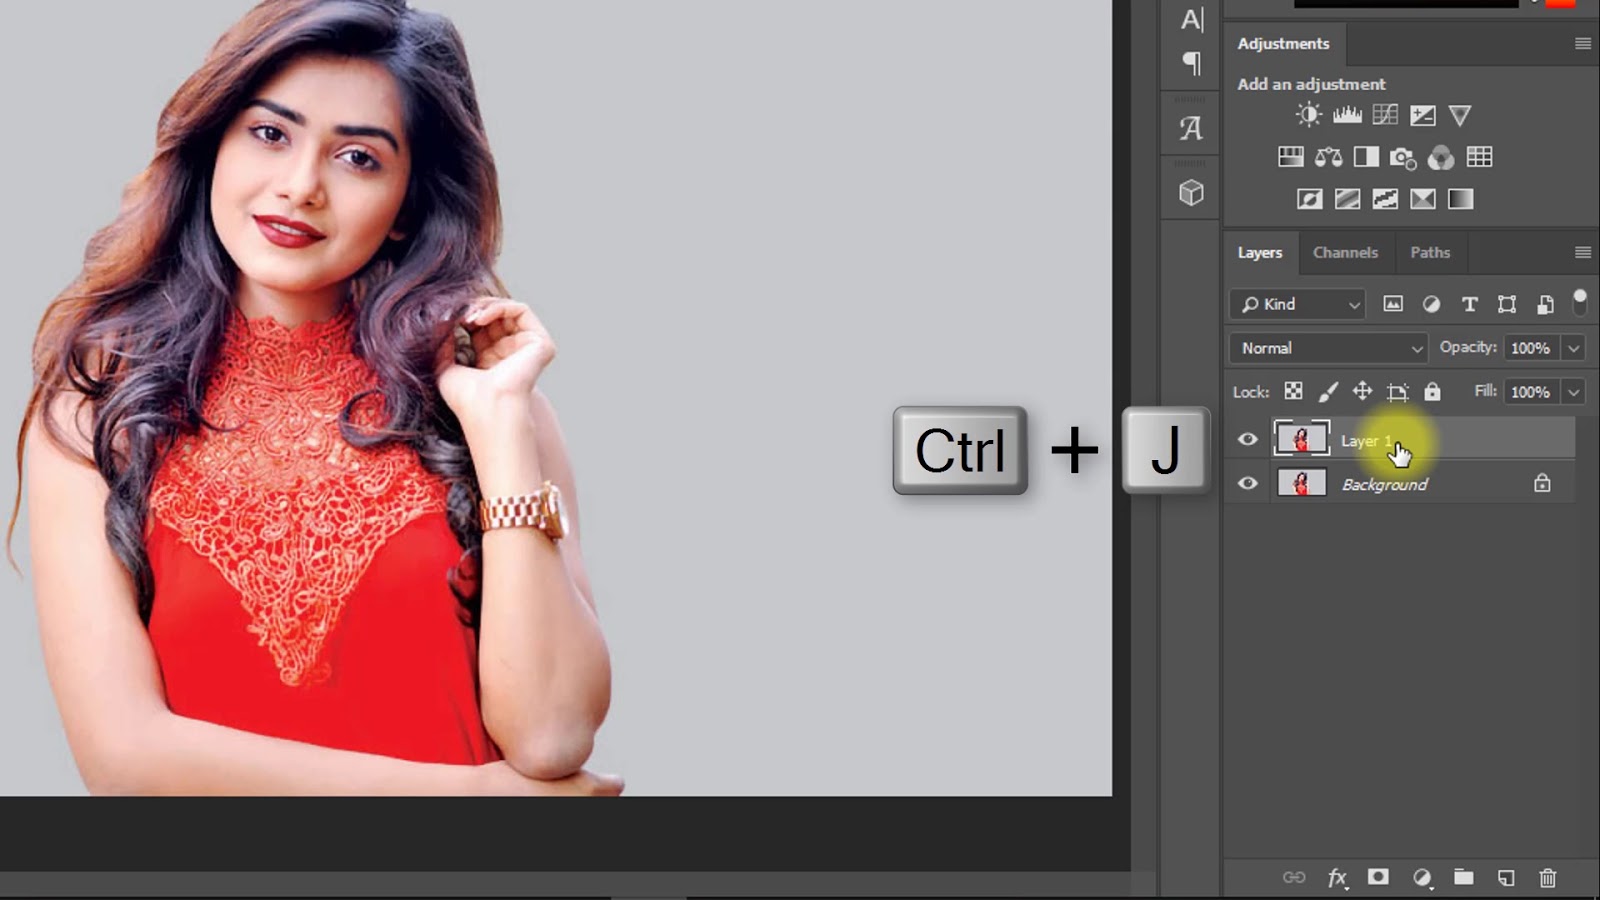 How to Quick Change Background color in Photoshop